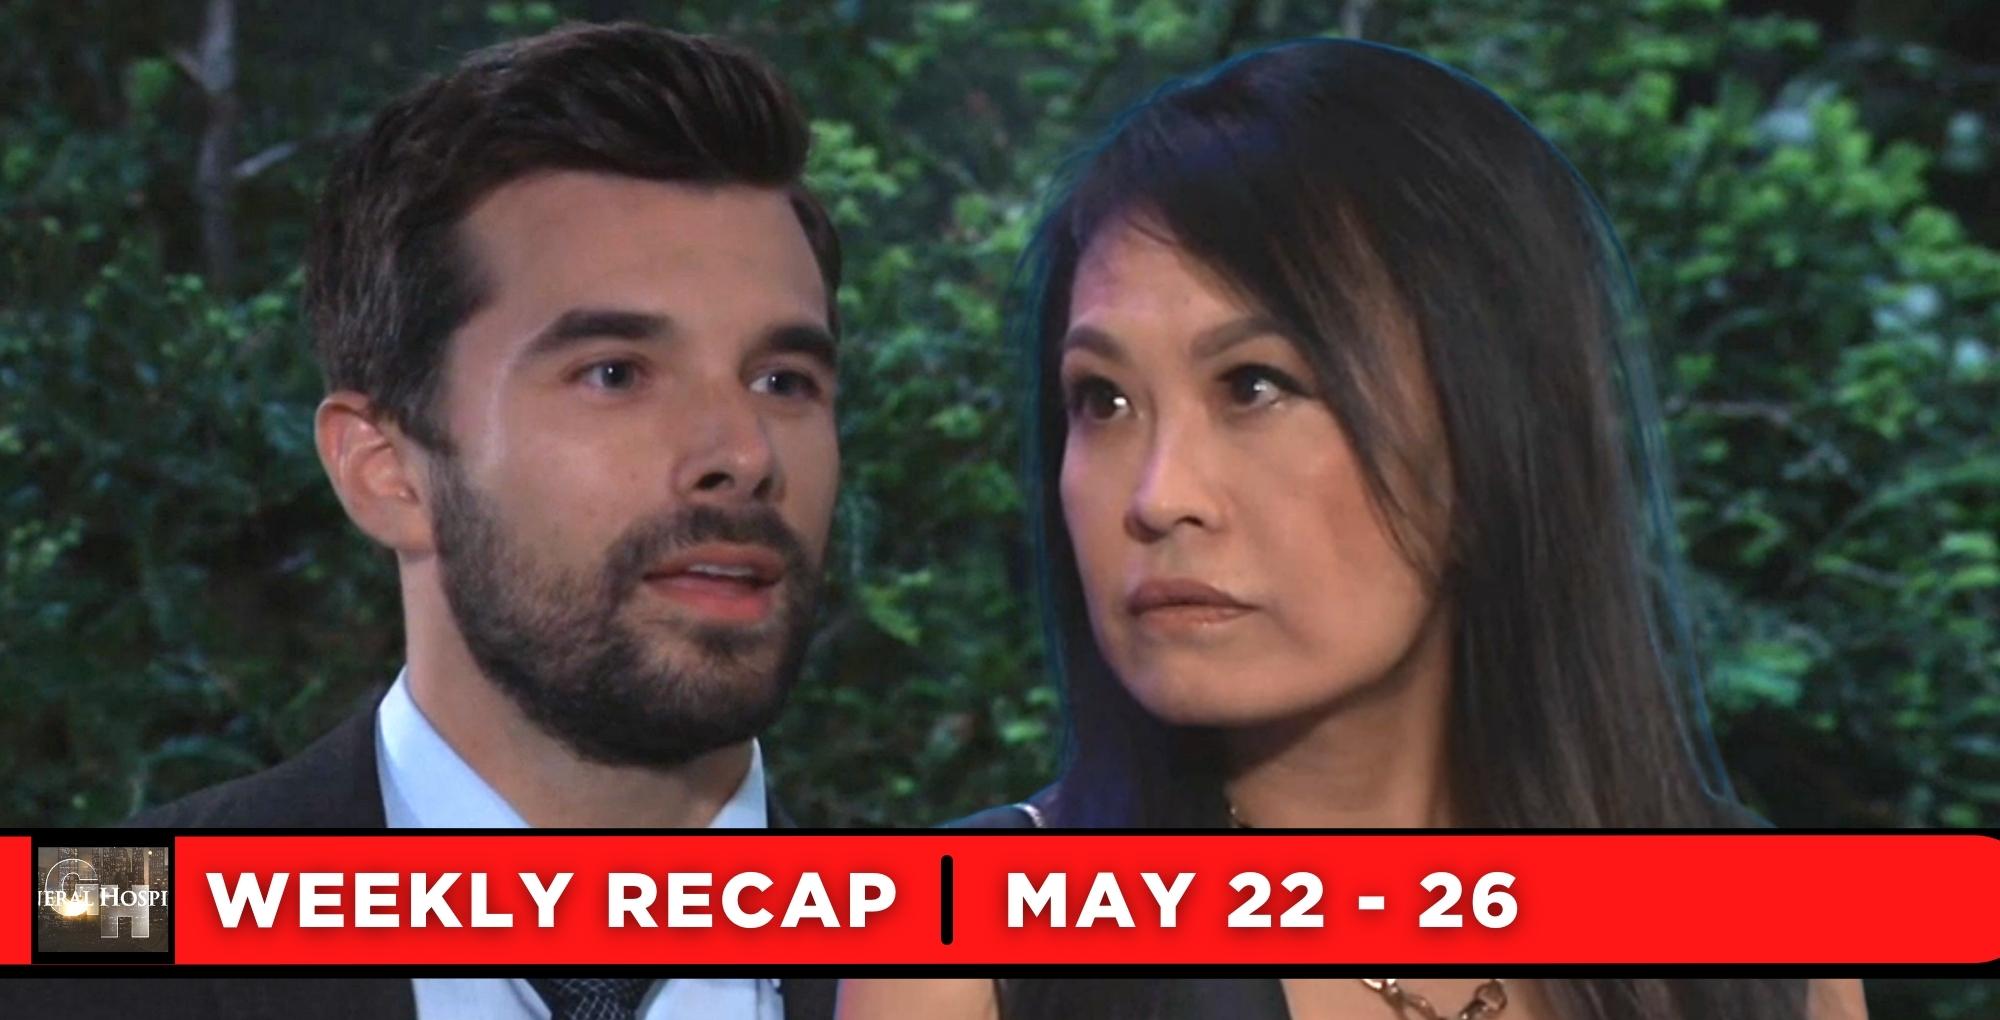 General Hospital Recaps: A Proposal, Punches Thrown & Miracle Treatment